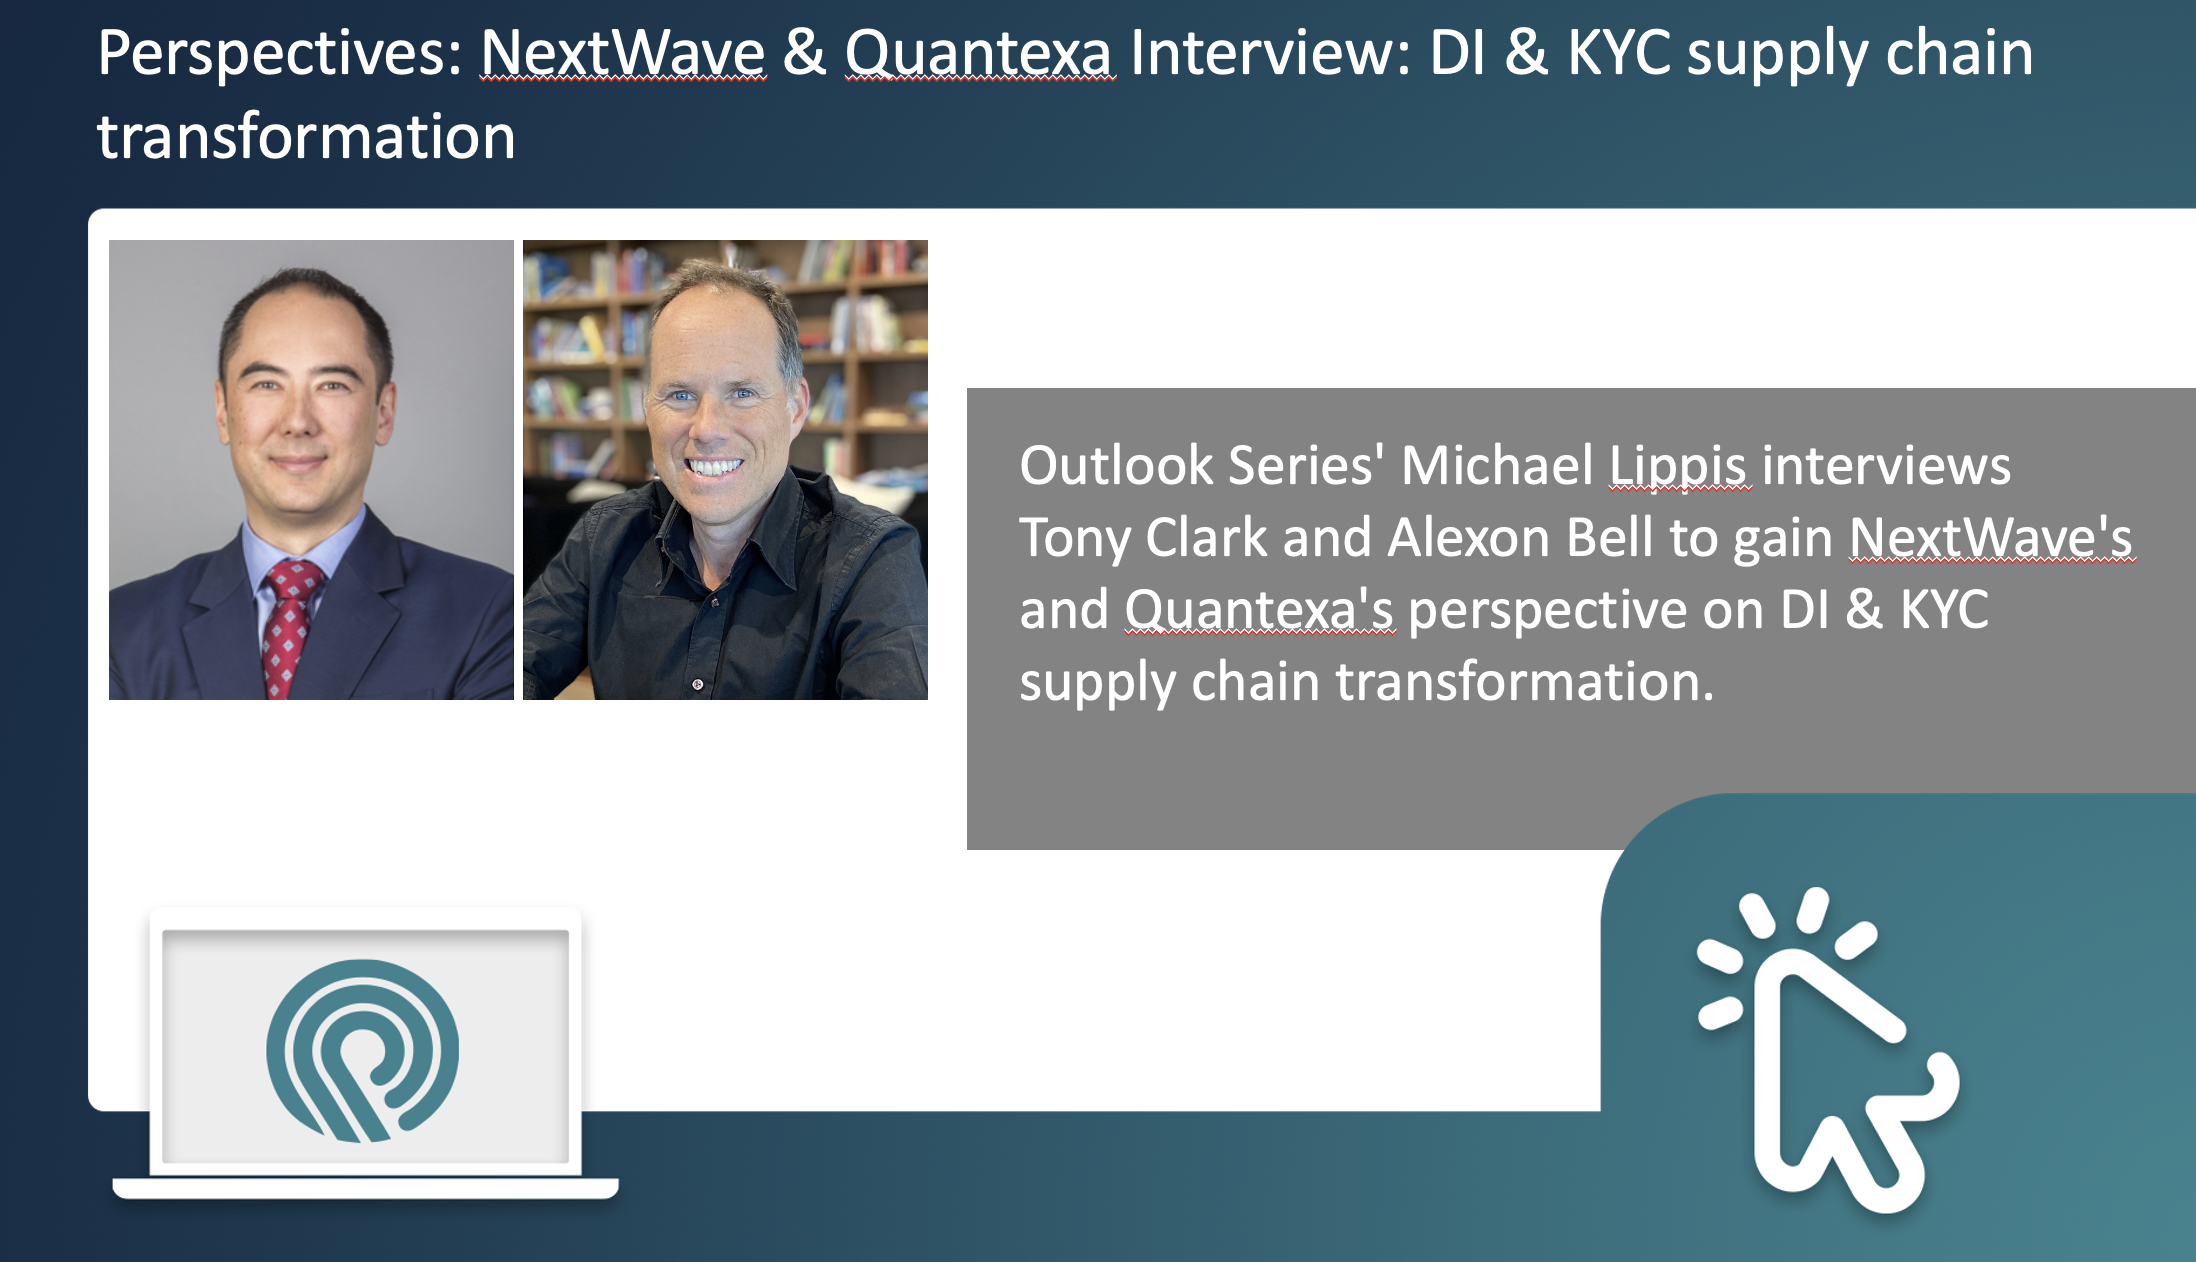 Perspectives: NextWave & Quantexa Interview: DI & KYC supply chain transformation